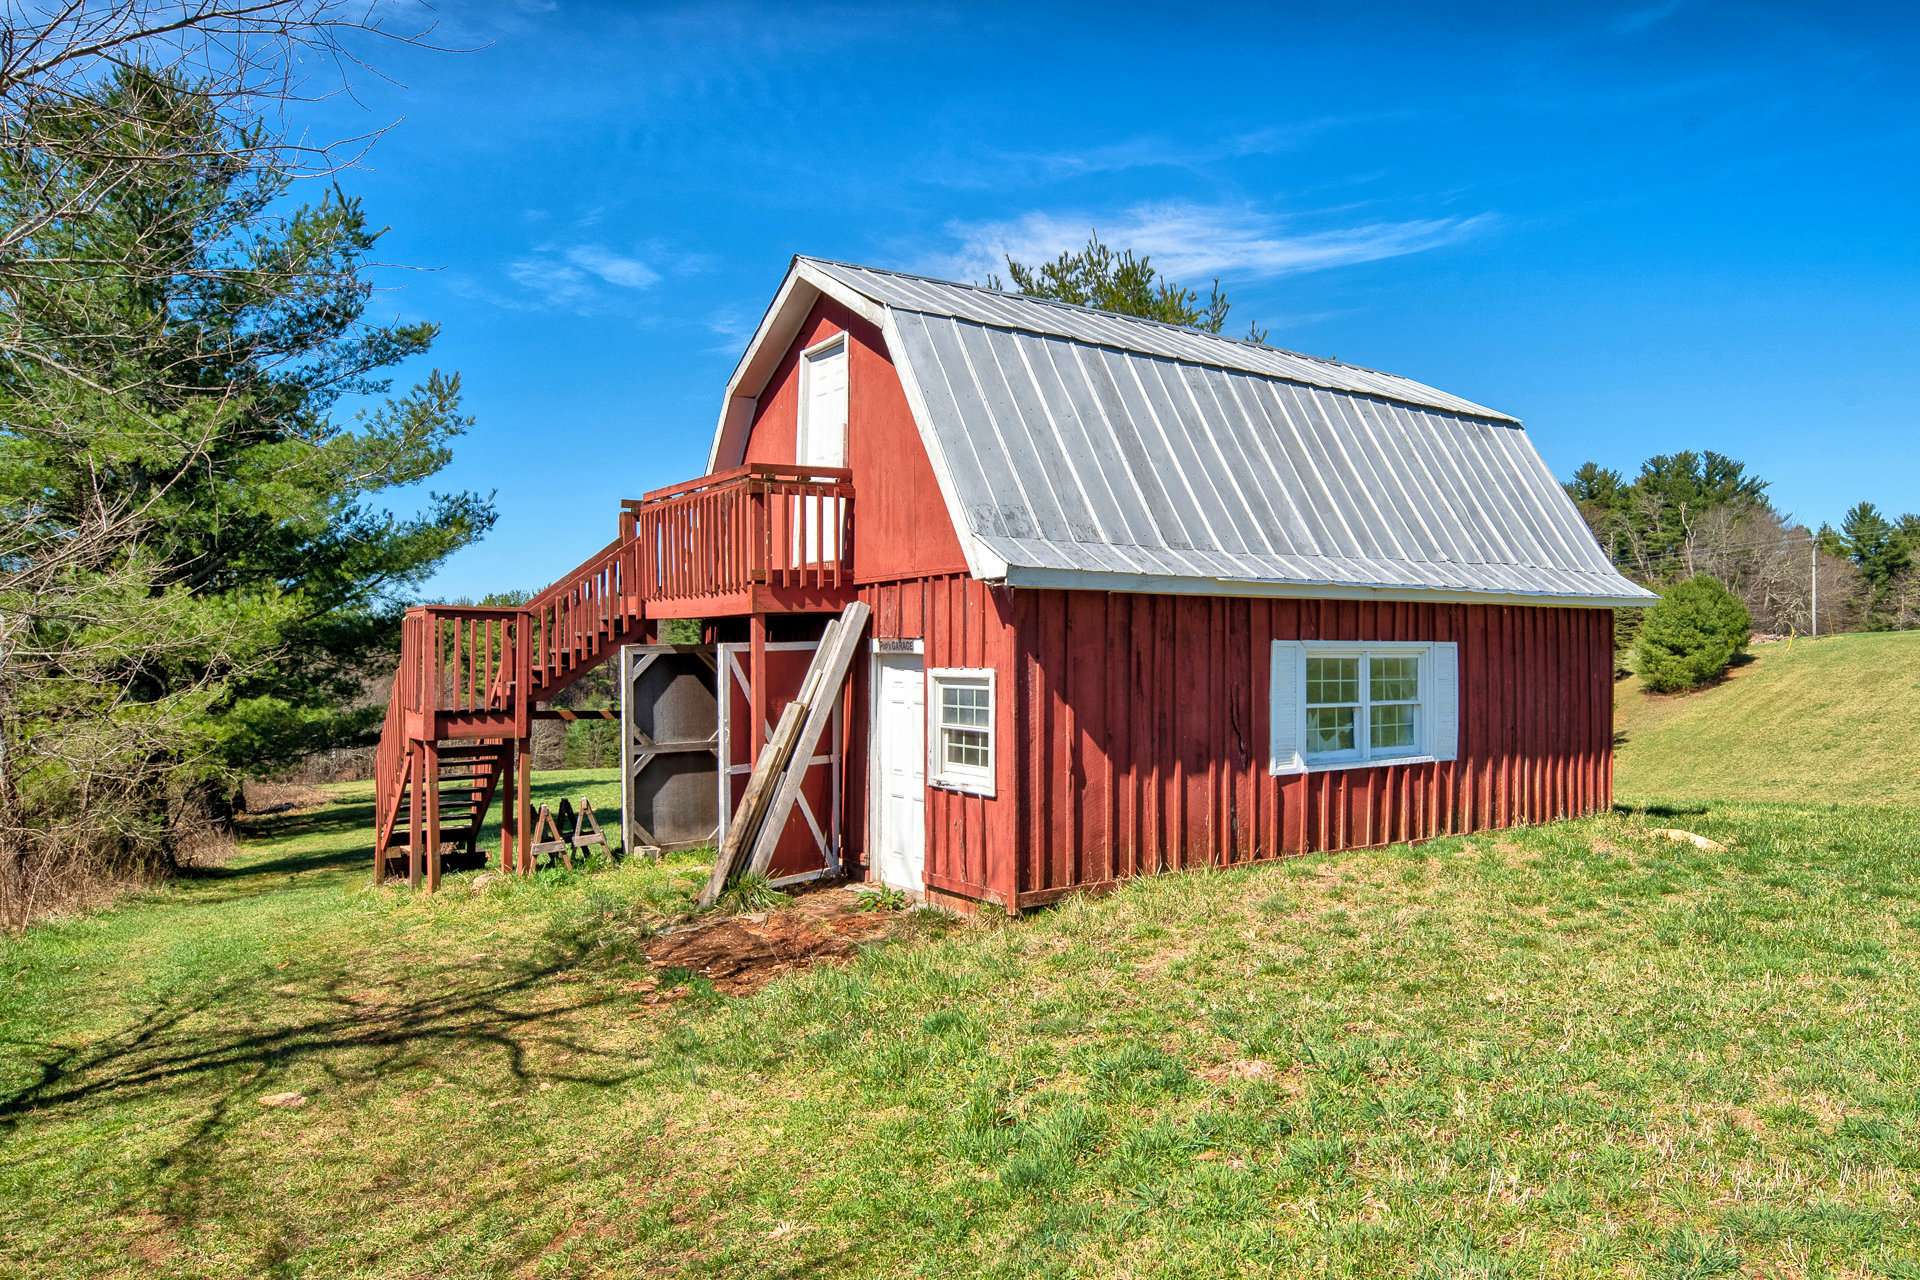 Two story barn for your horse.